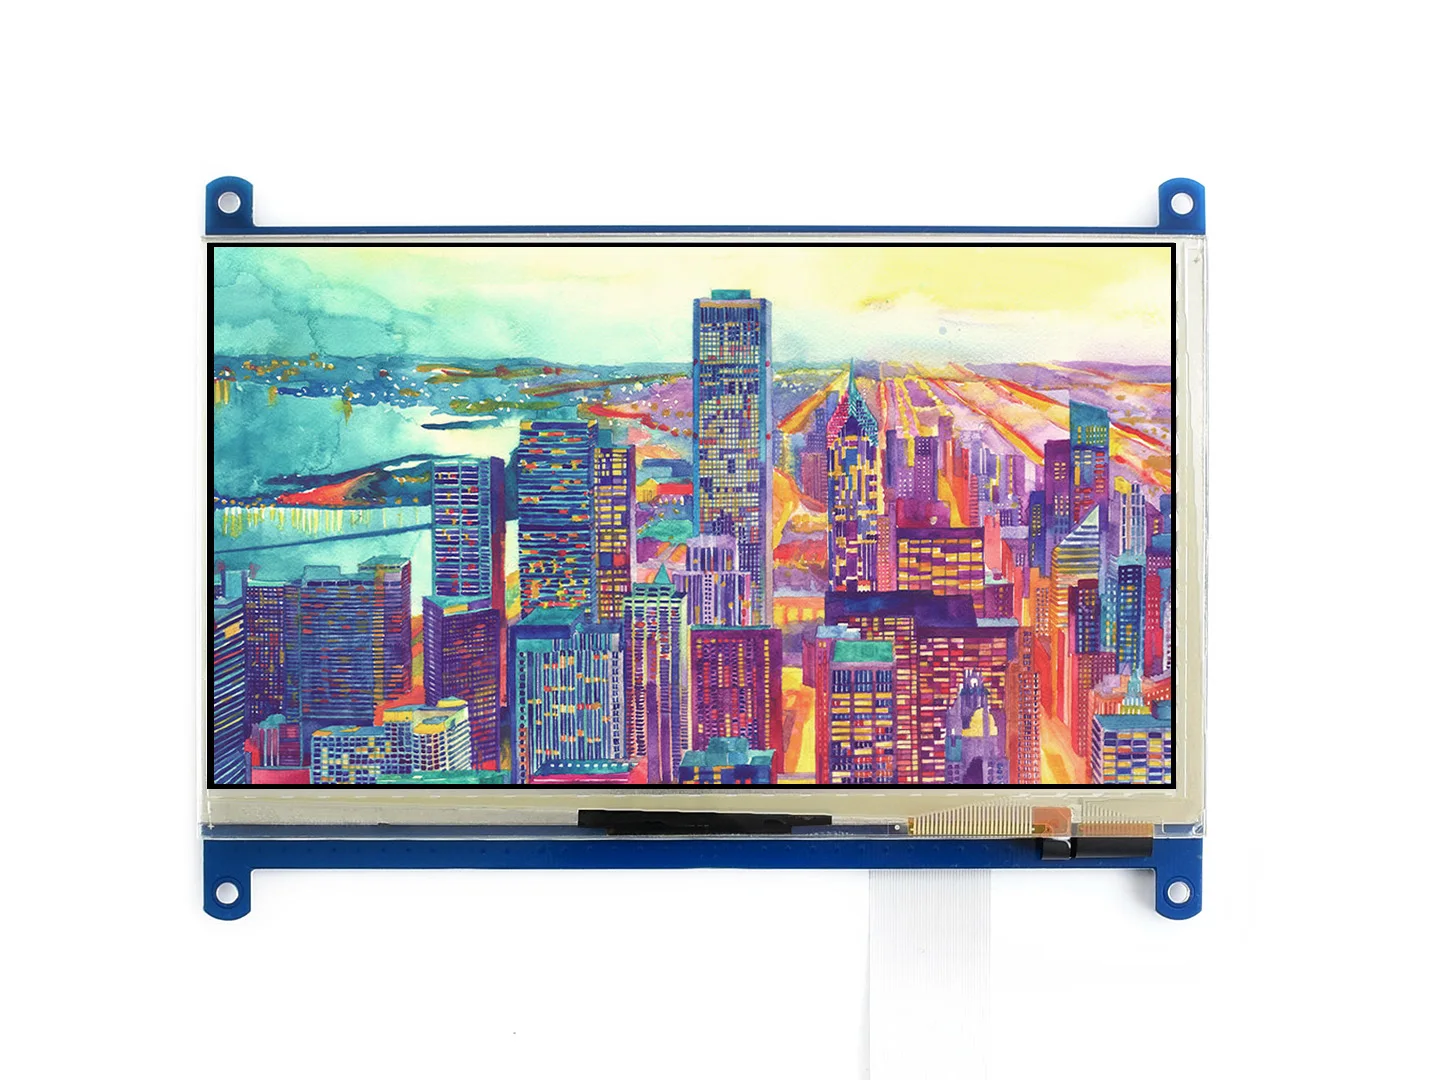 7inch Capacitive Touch LCD (F) 1024x600,Multicolor Graphic LCD, With Capacitive Touch Screen And Stand-Alone Touch Controller